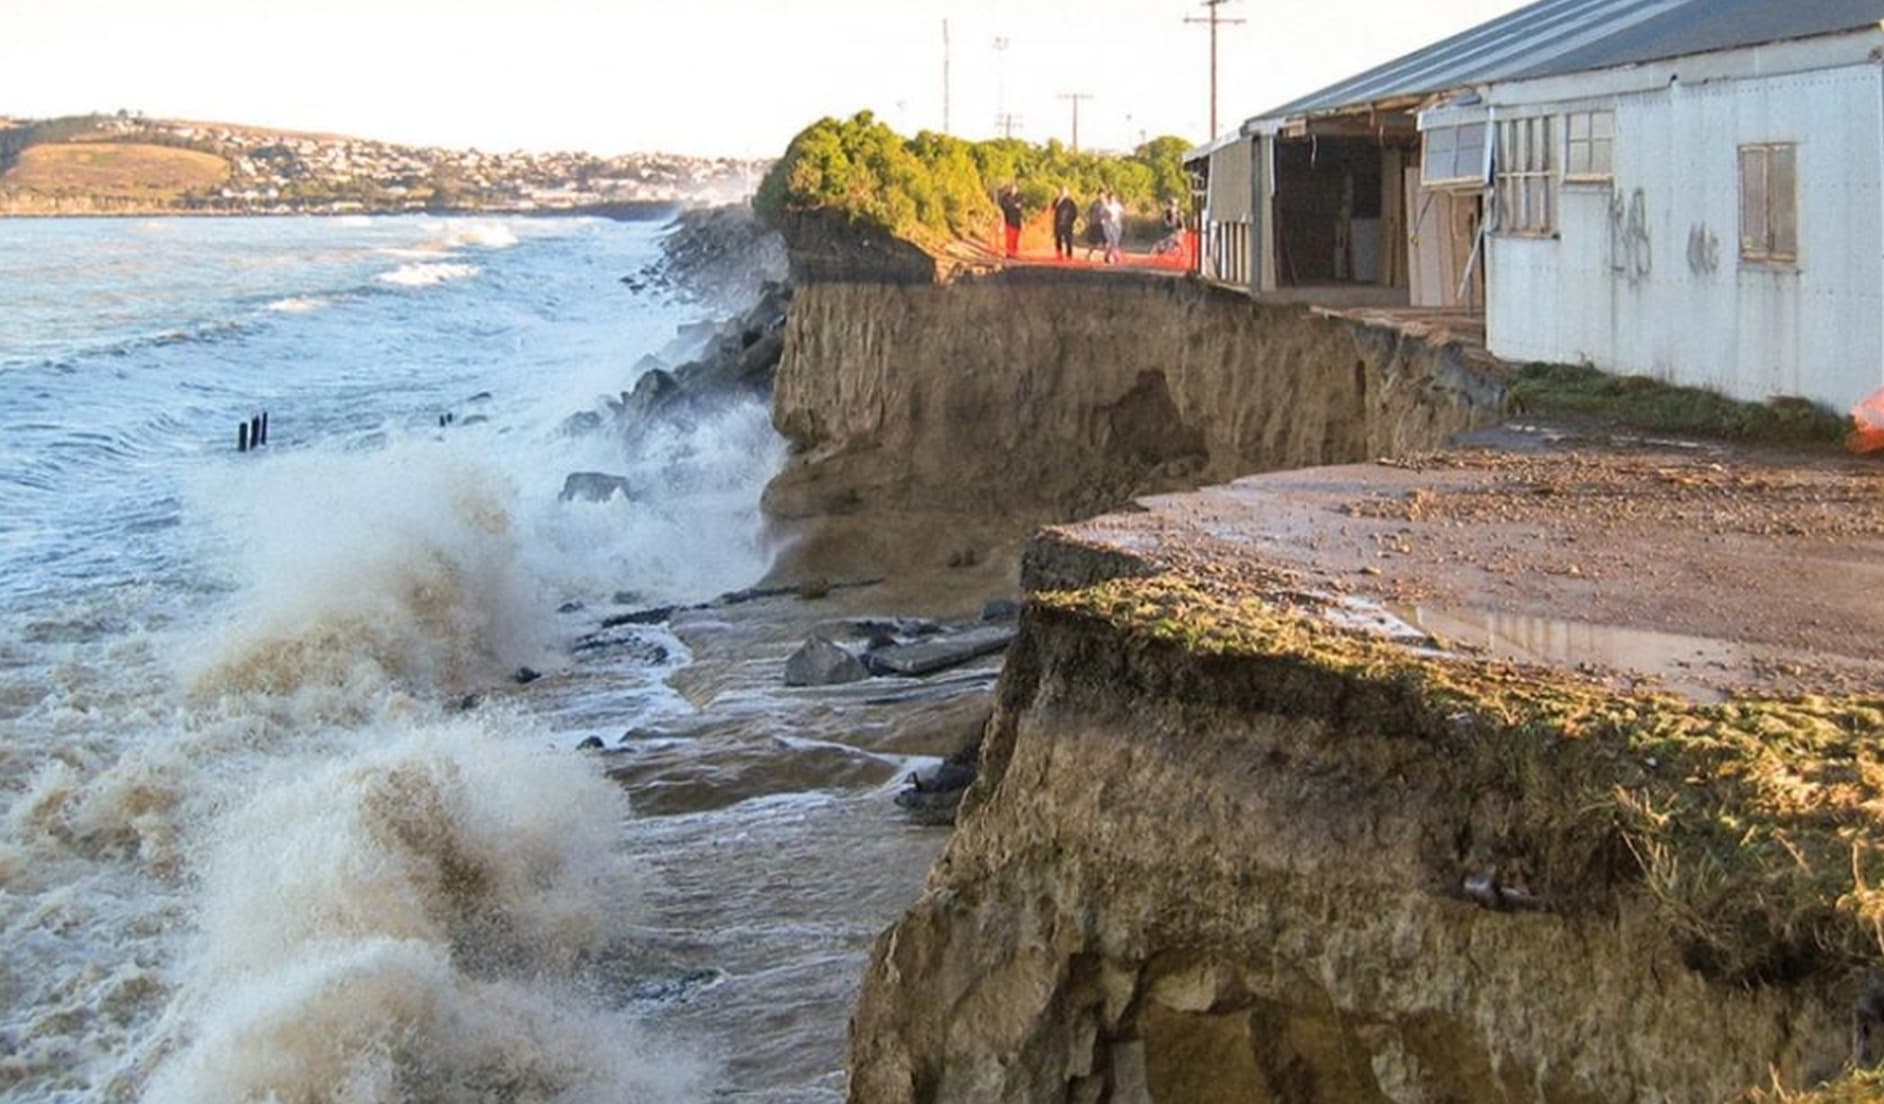 In June 2007, the coastal cliffs at Oamaru were washed away, affecting this factory and a conservation area for blue penguins